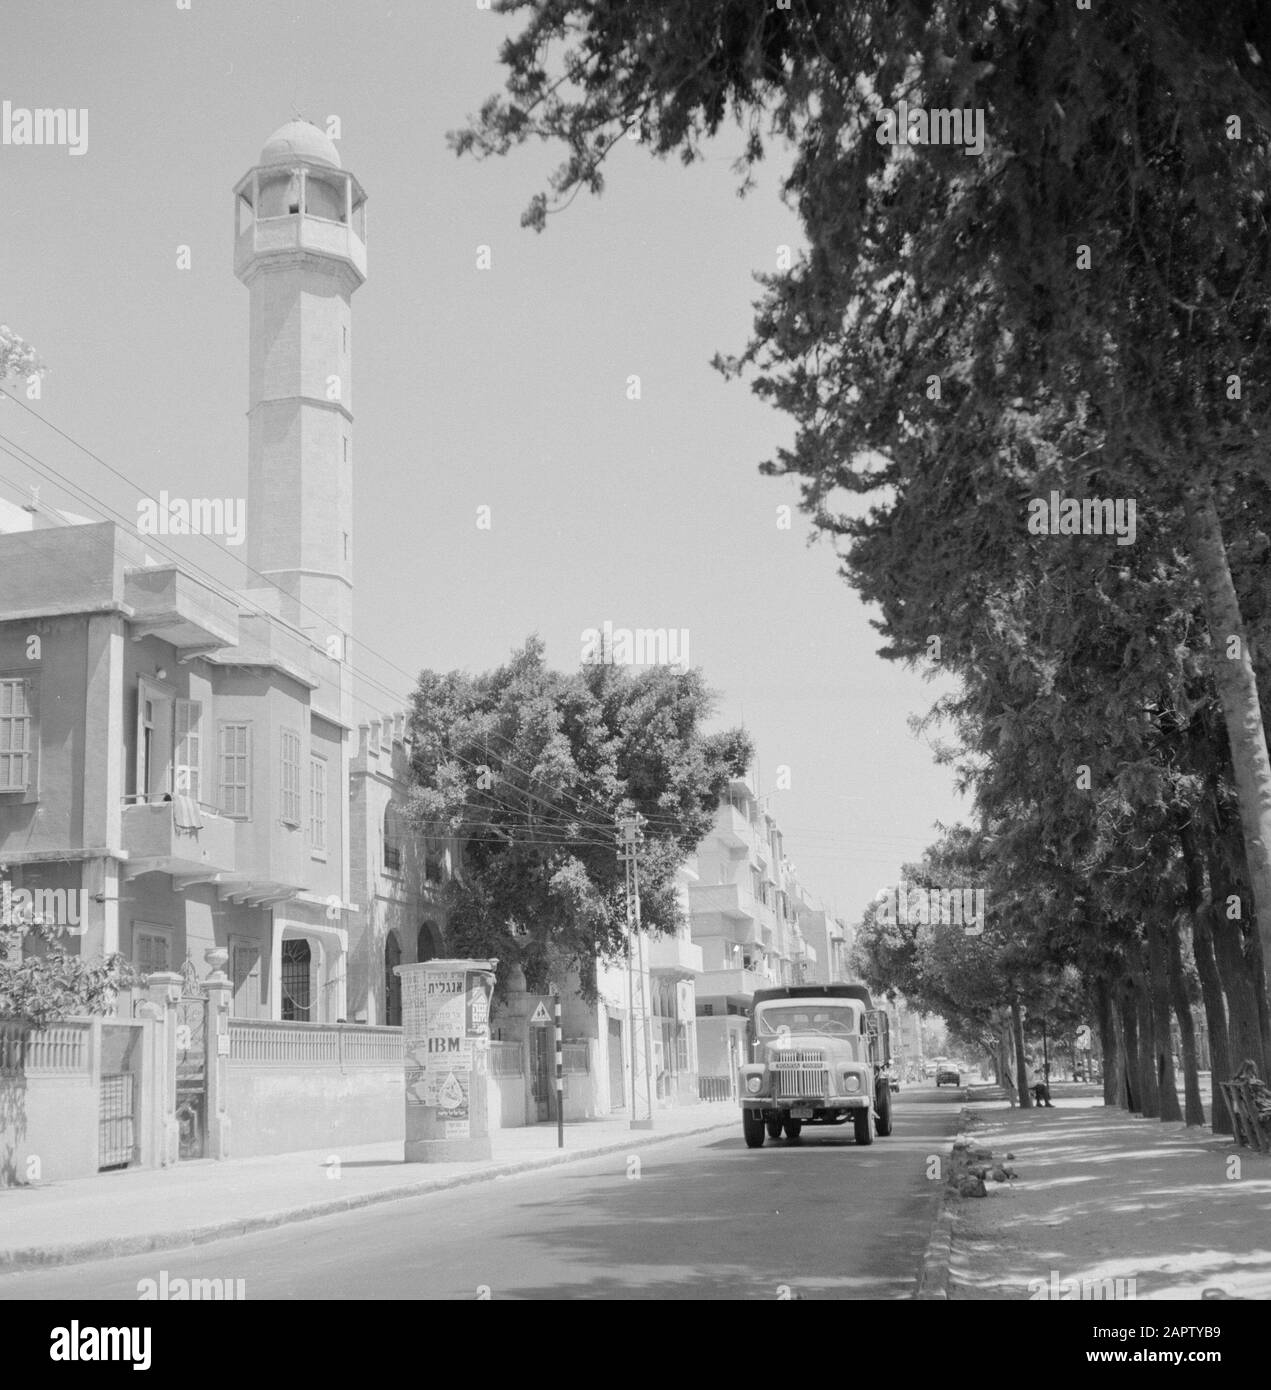 Israel: Jaffa (Tel Aviv)  Jaffa. Street view with a Scania Vabis truck and with a minaret on the left. On the sidewalk an advertising column Annotation: Jaffa is now a city district of Tel Aviv Date: undated Location: Israel, Jaffa, Tel Aviv Keywords: trees, mosques, billboards, street statues, towers, trucks Stock Photo